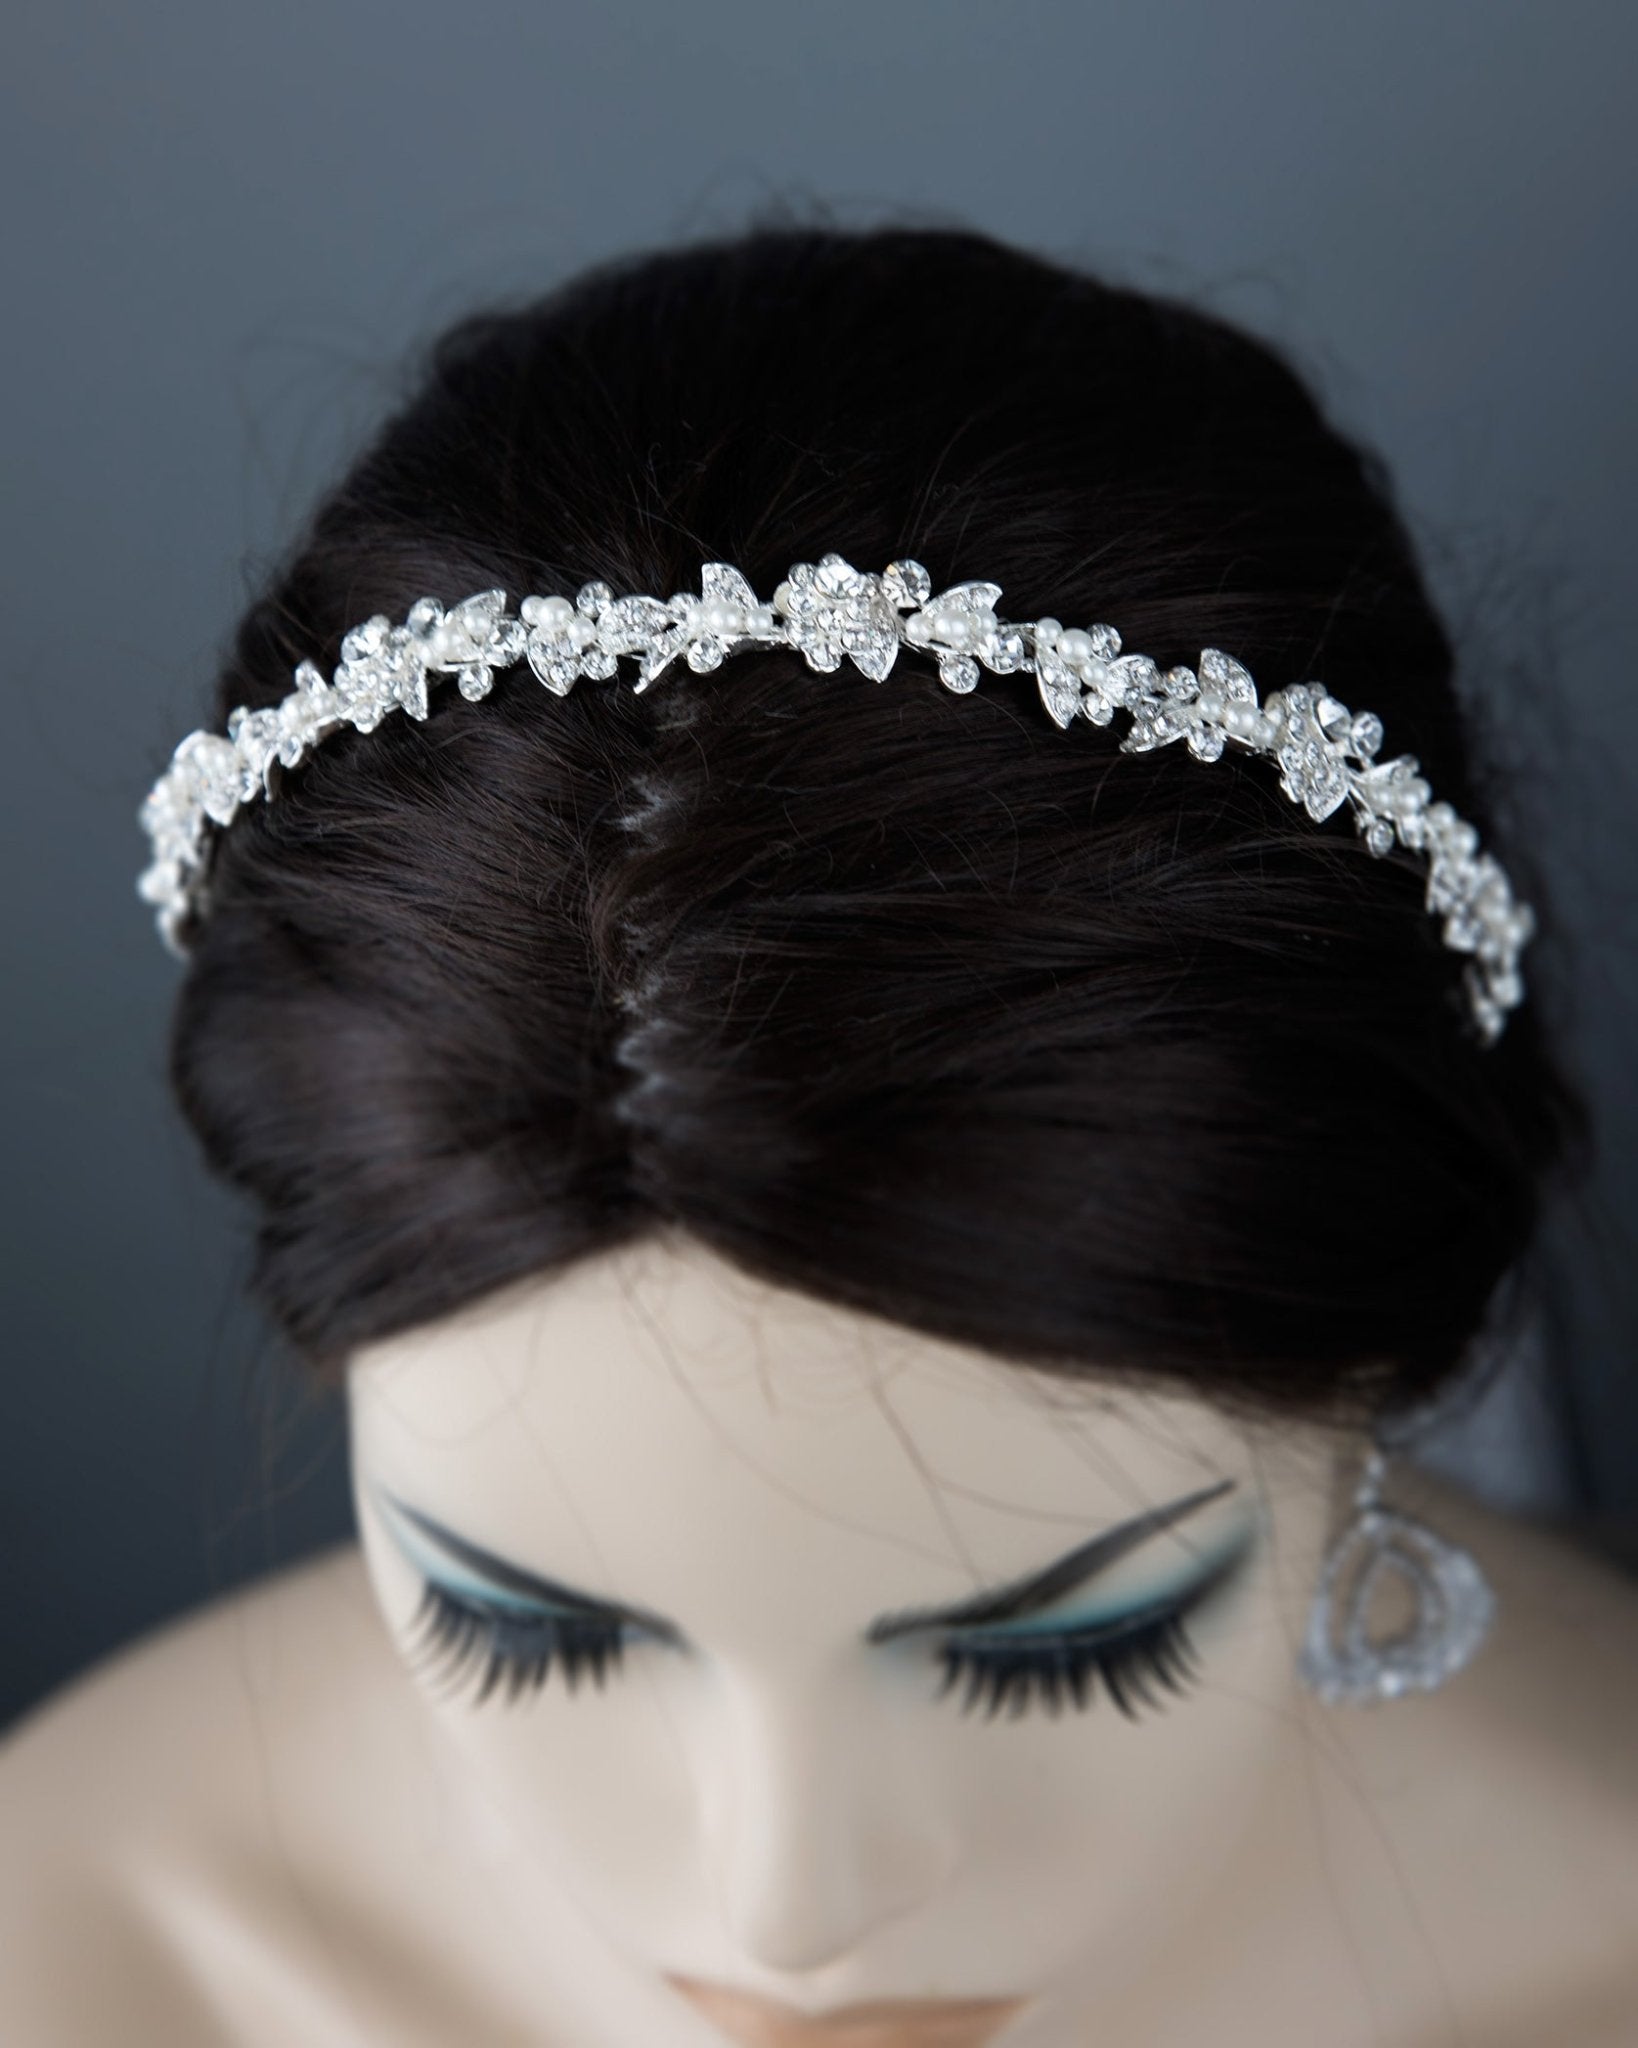 Wedding Tiara With Crystal Leaves and Tiny Pearls - Cassandra Lynne